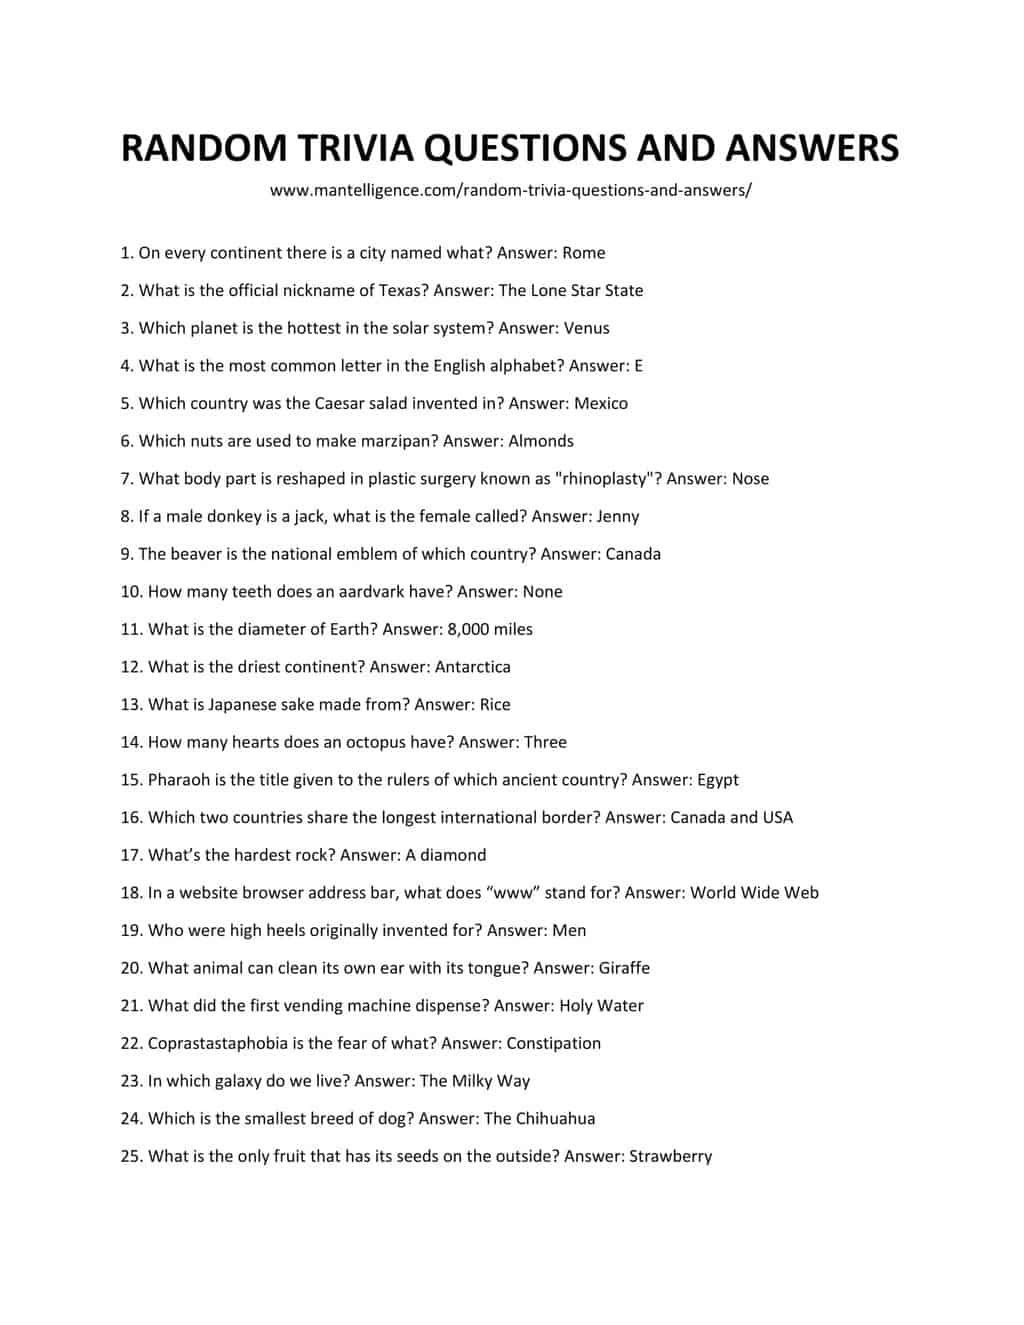 Random Trivia Questions And Answers Easy